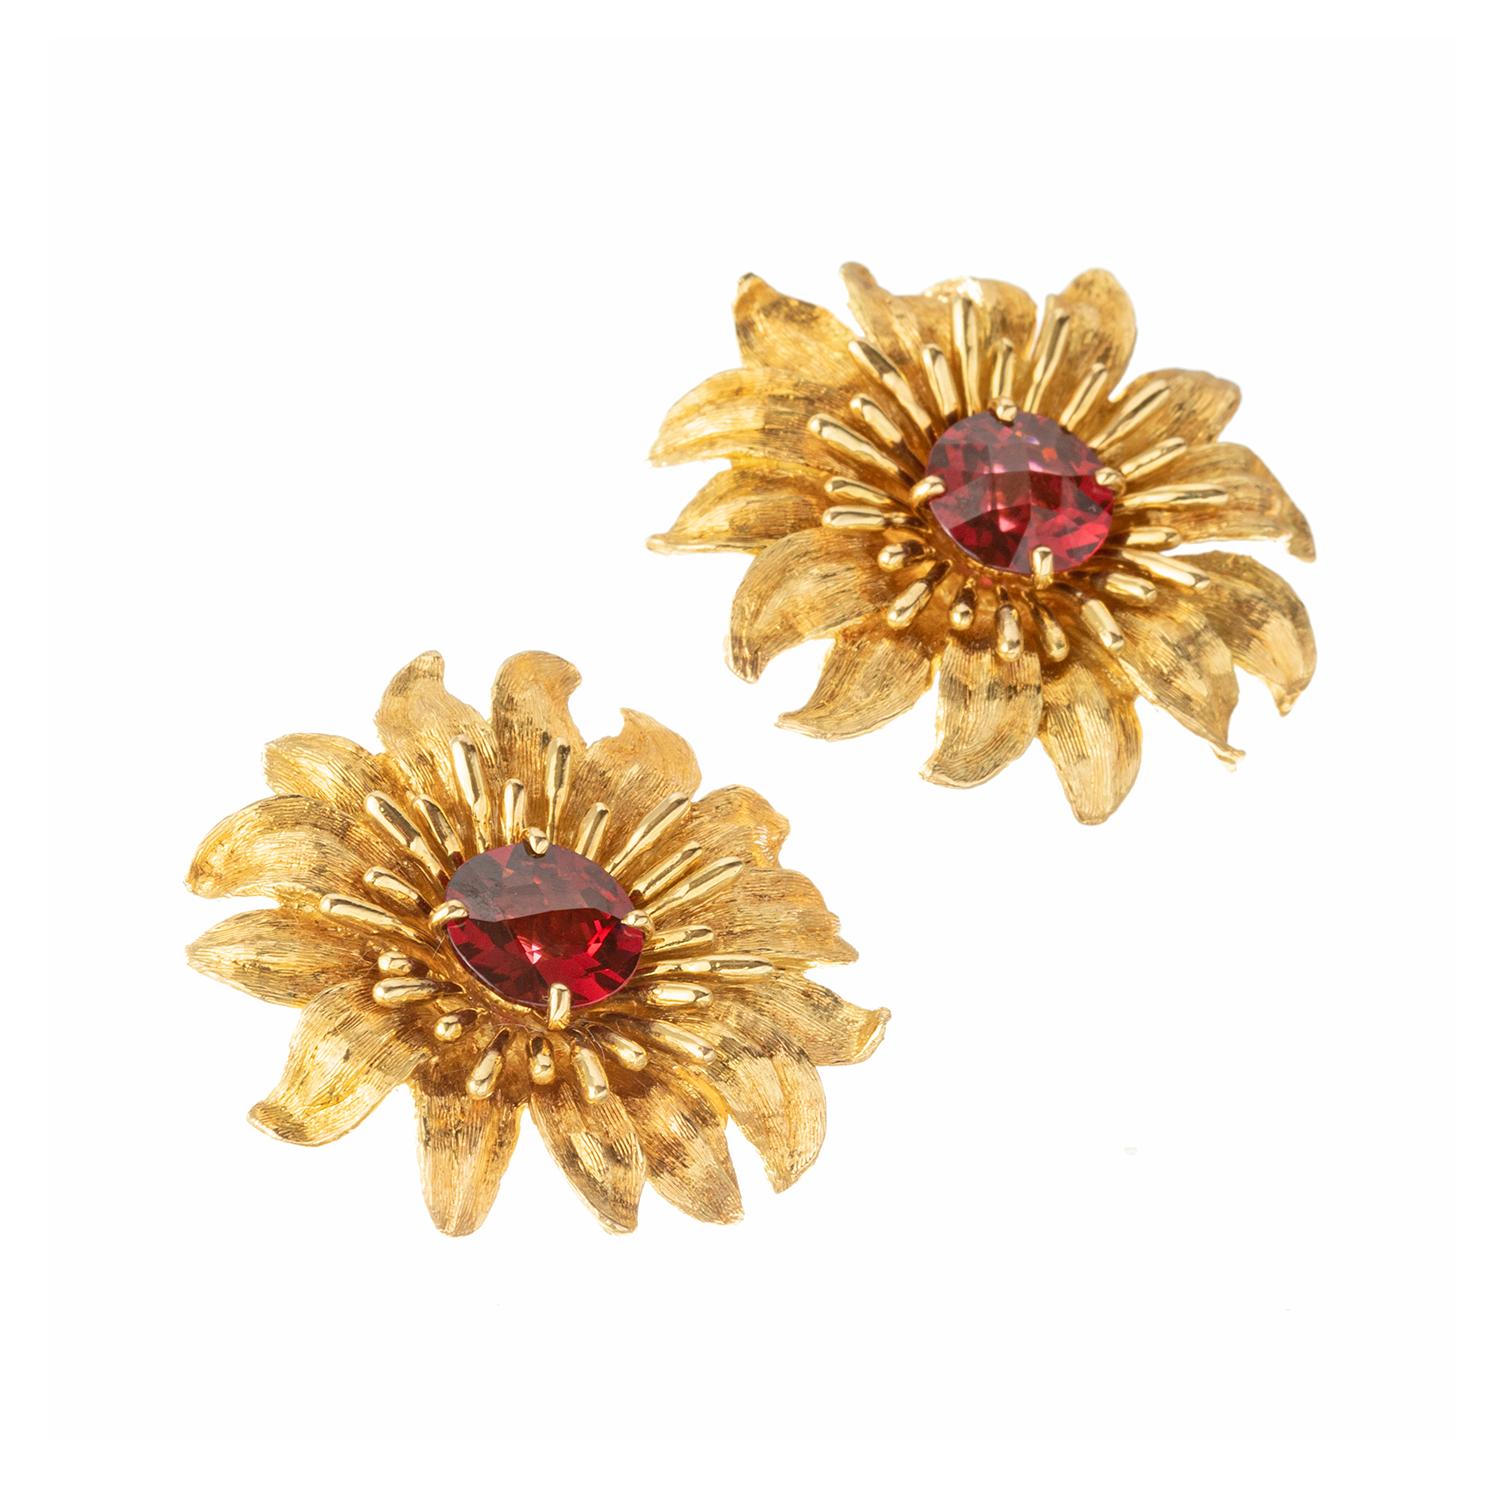 Handcrafted by Robert Bruce Bielka in the late 20th century, these large flower earrings are built in solid textured 18k yellow gold and each center a round faceted rhodolite garnet. Omega-style clip backs (posts may be added upon customer request).